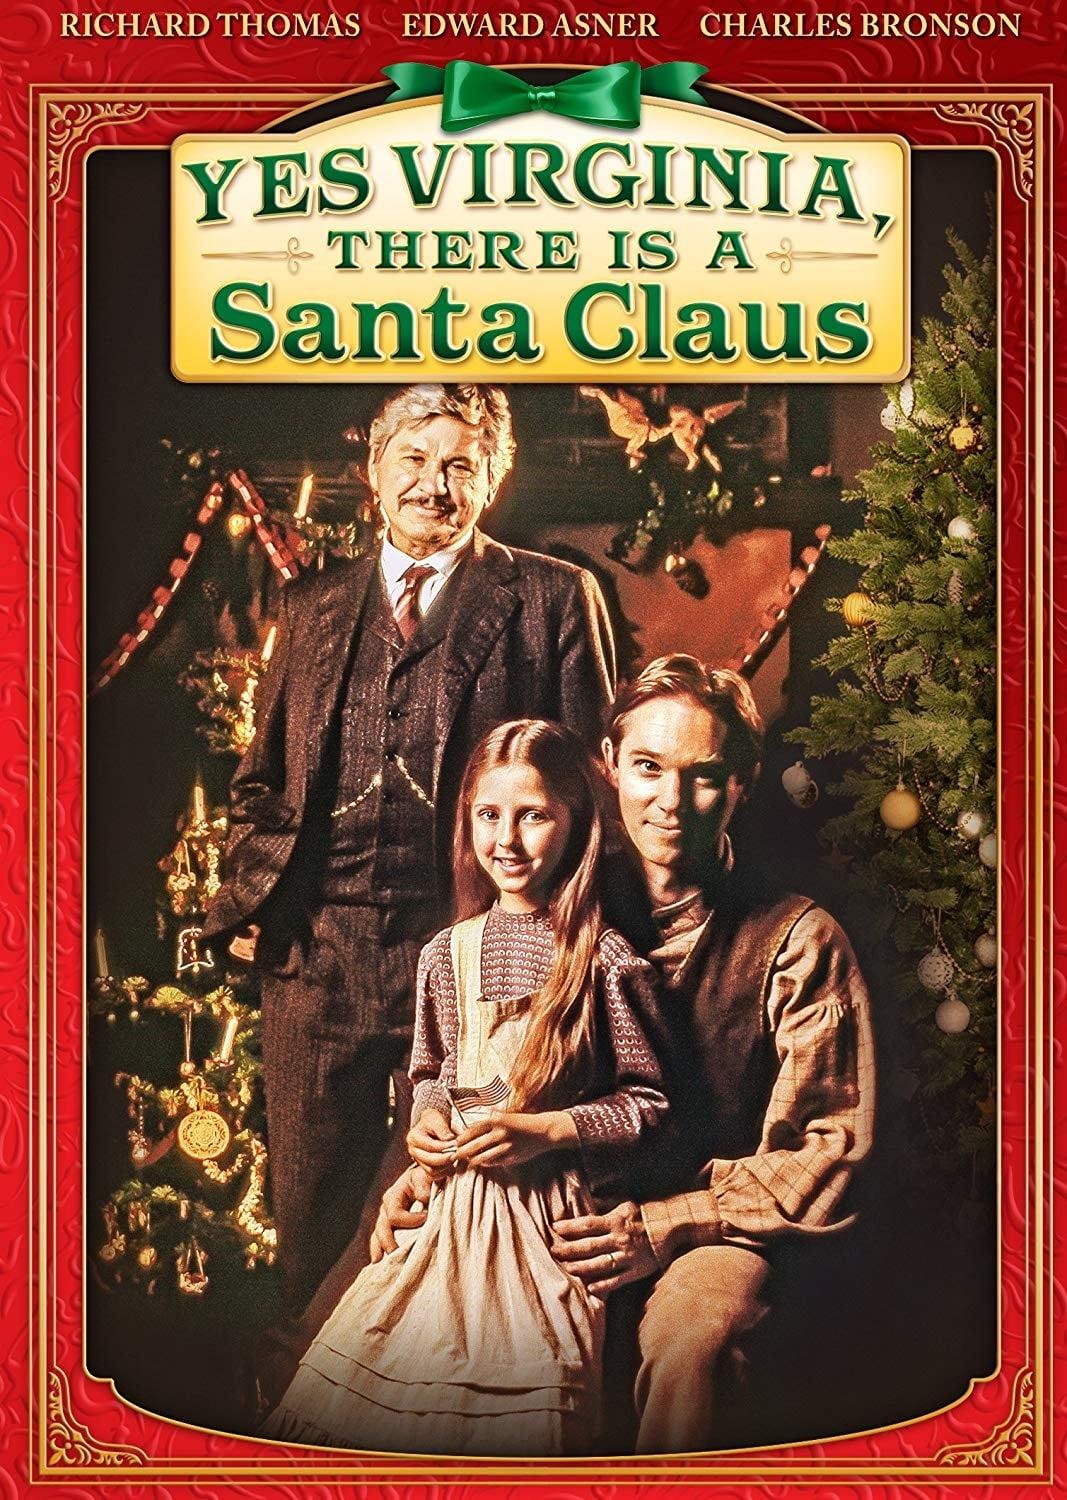 Yes Virginia, There Is a Santa Claus poster